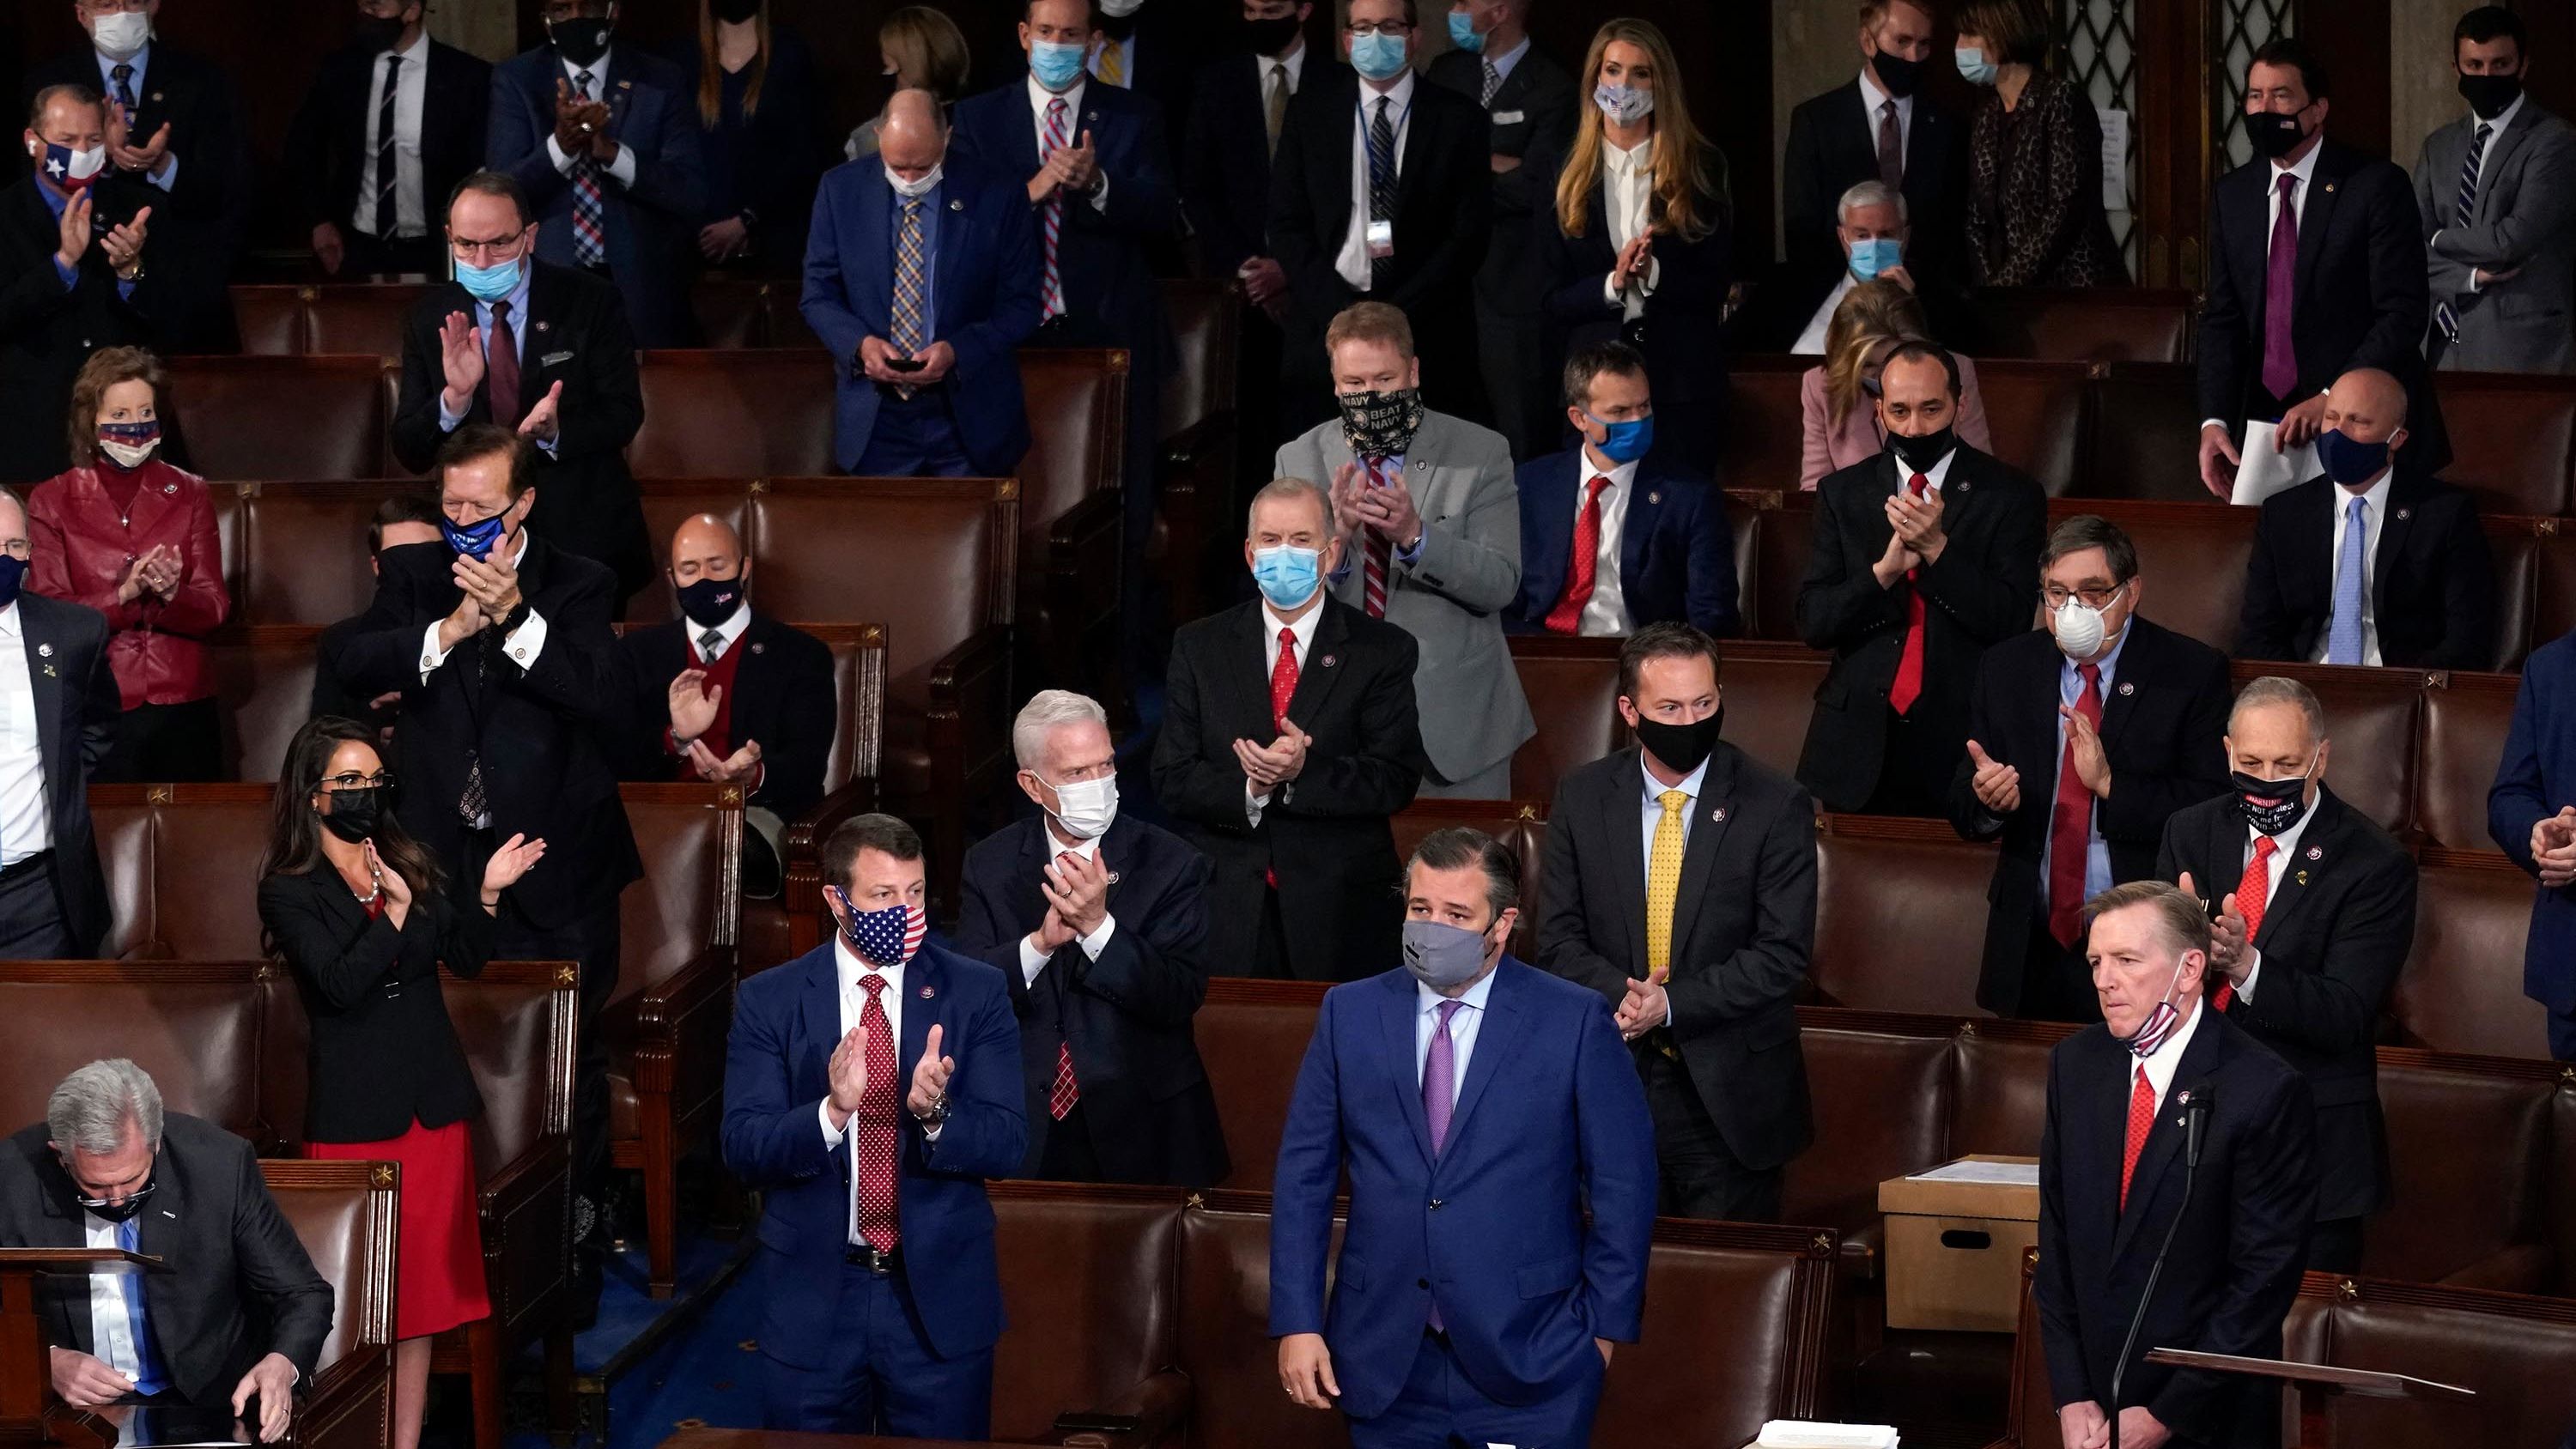 Republicans applaud after US Rep. Paul Gosar, lower right, objected to certifying the Electoral College votes from Arizona. The Senate voted 93-6, however, <a href="https://www.cnn.com/2021/01/06/politics/2020-election-congress-electoral-college-vote-count/index.html" target="_blank">to dismiss the objection,</a> and it voted 92-7 to reject an objection to Pennsylvania's votes. In the House, a majority of Republicans voted to object to the results, but they were still soundly rejected: 303-121 for Arizona and 282-138 for Pennsylvania.